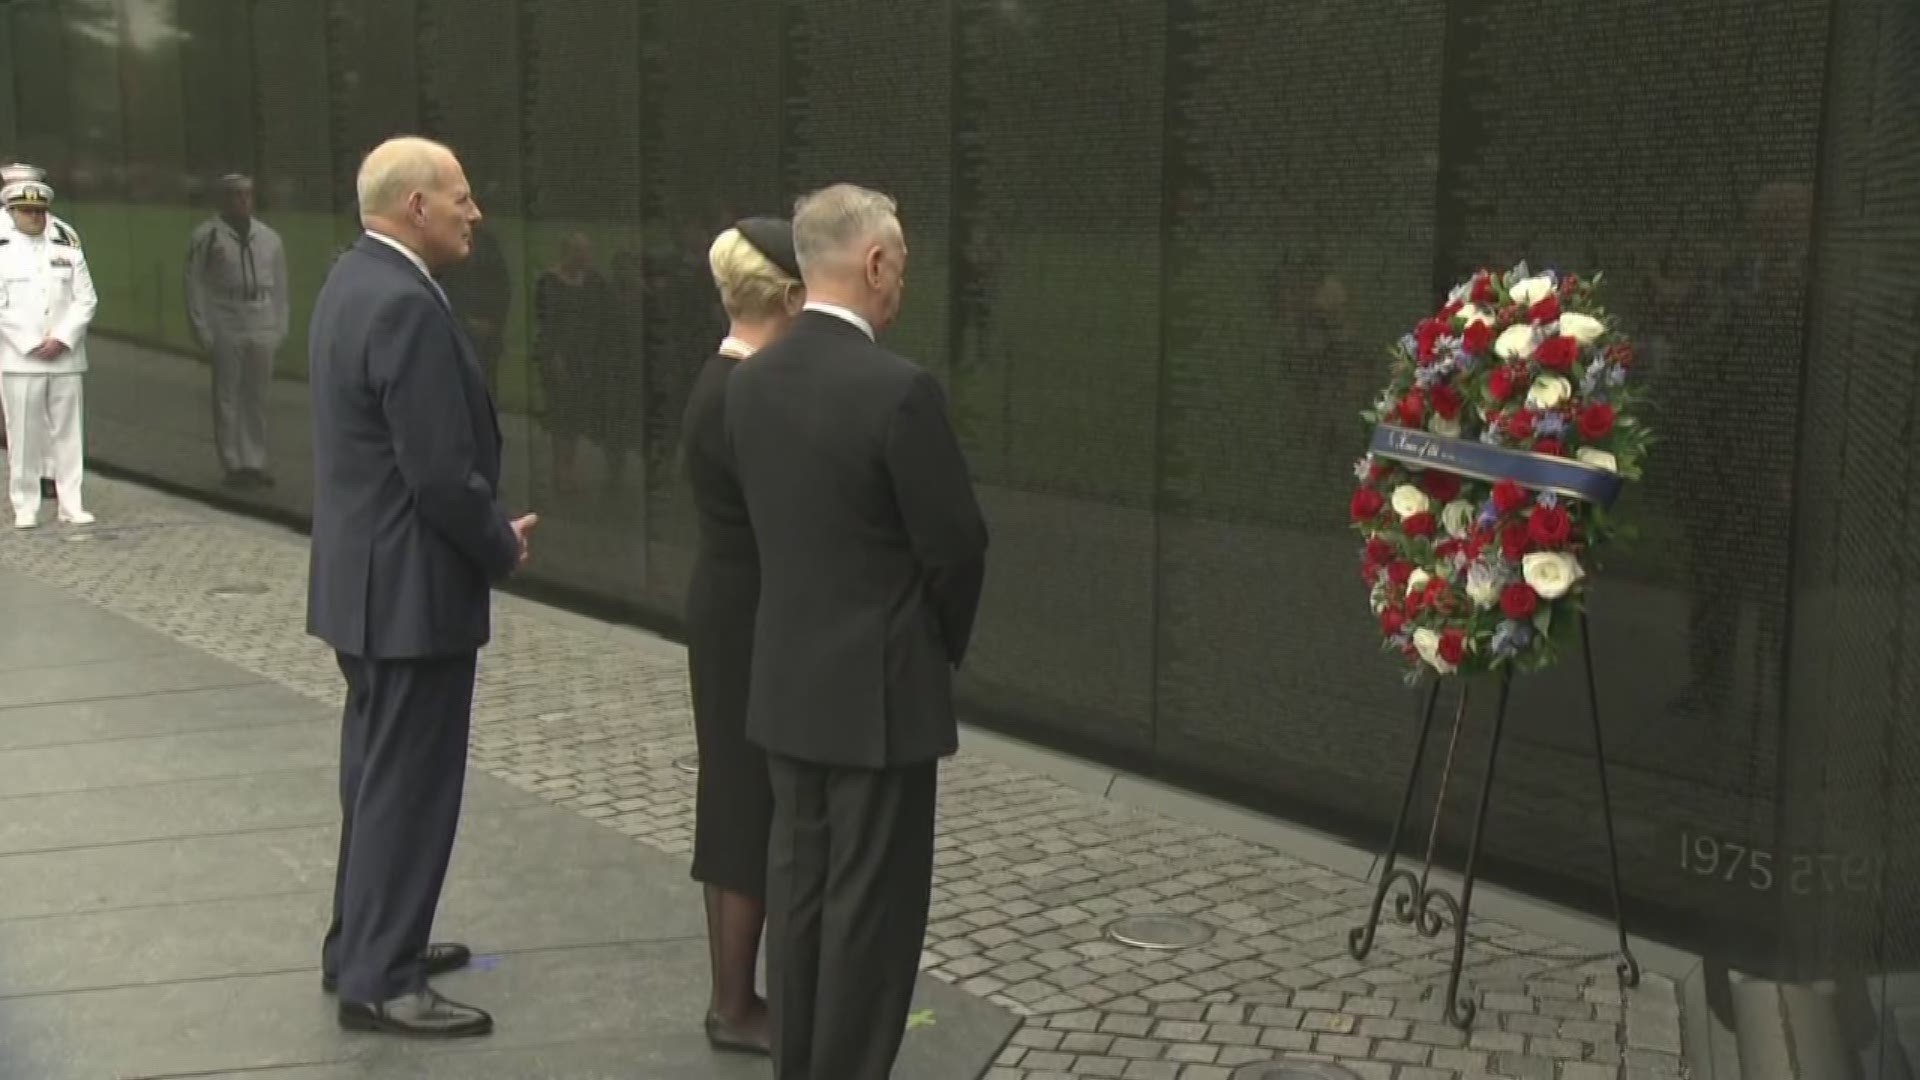 To honor her late husband and service members, Mrs. McCain left a wreath at the memorial.